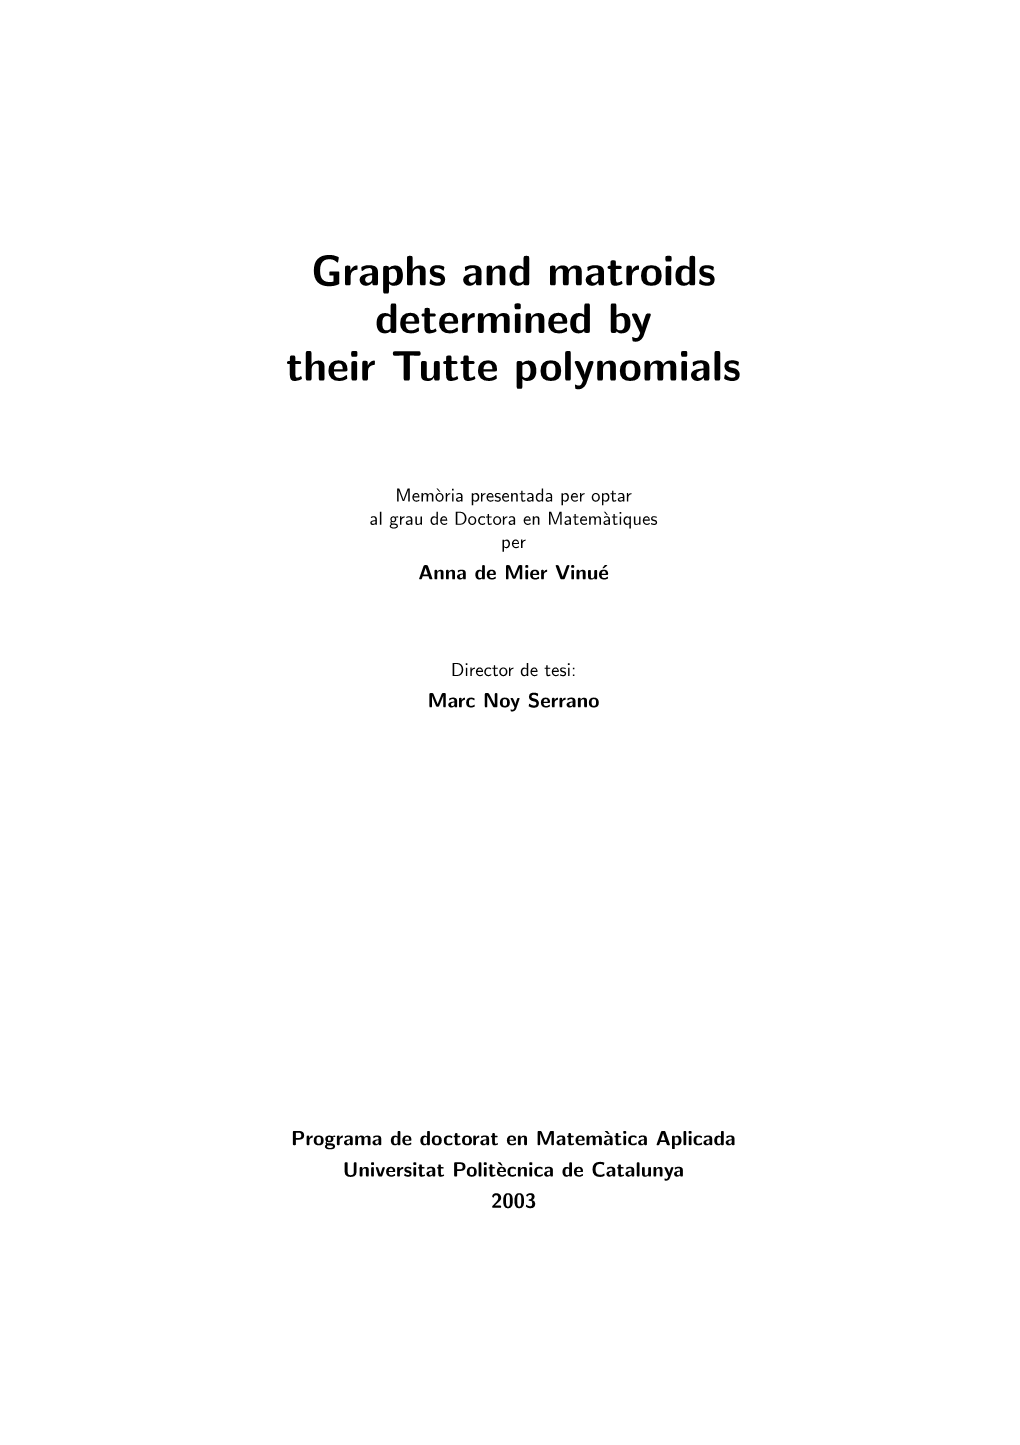 Graphs and Matroids Determined by Their Tutte Polynomials